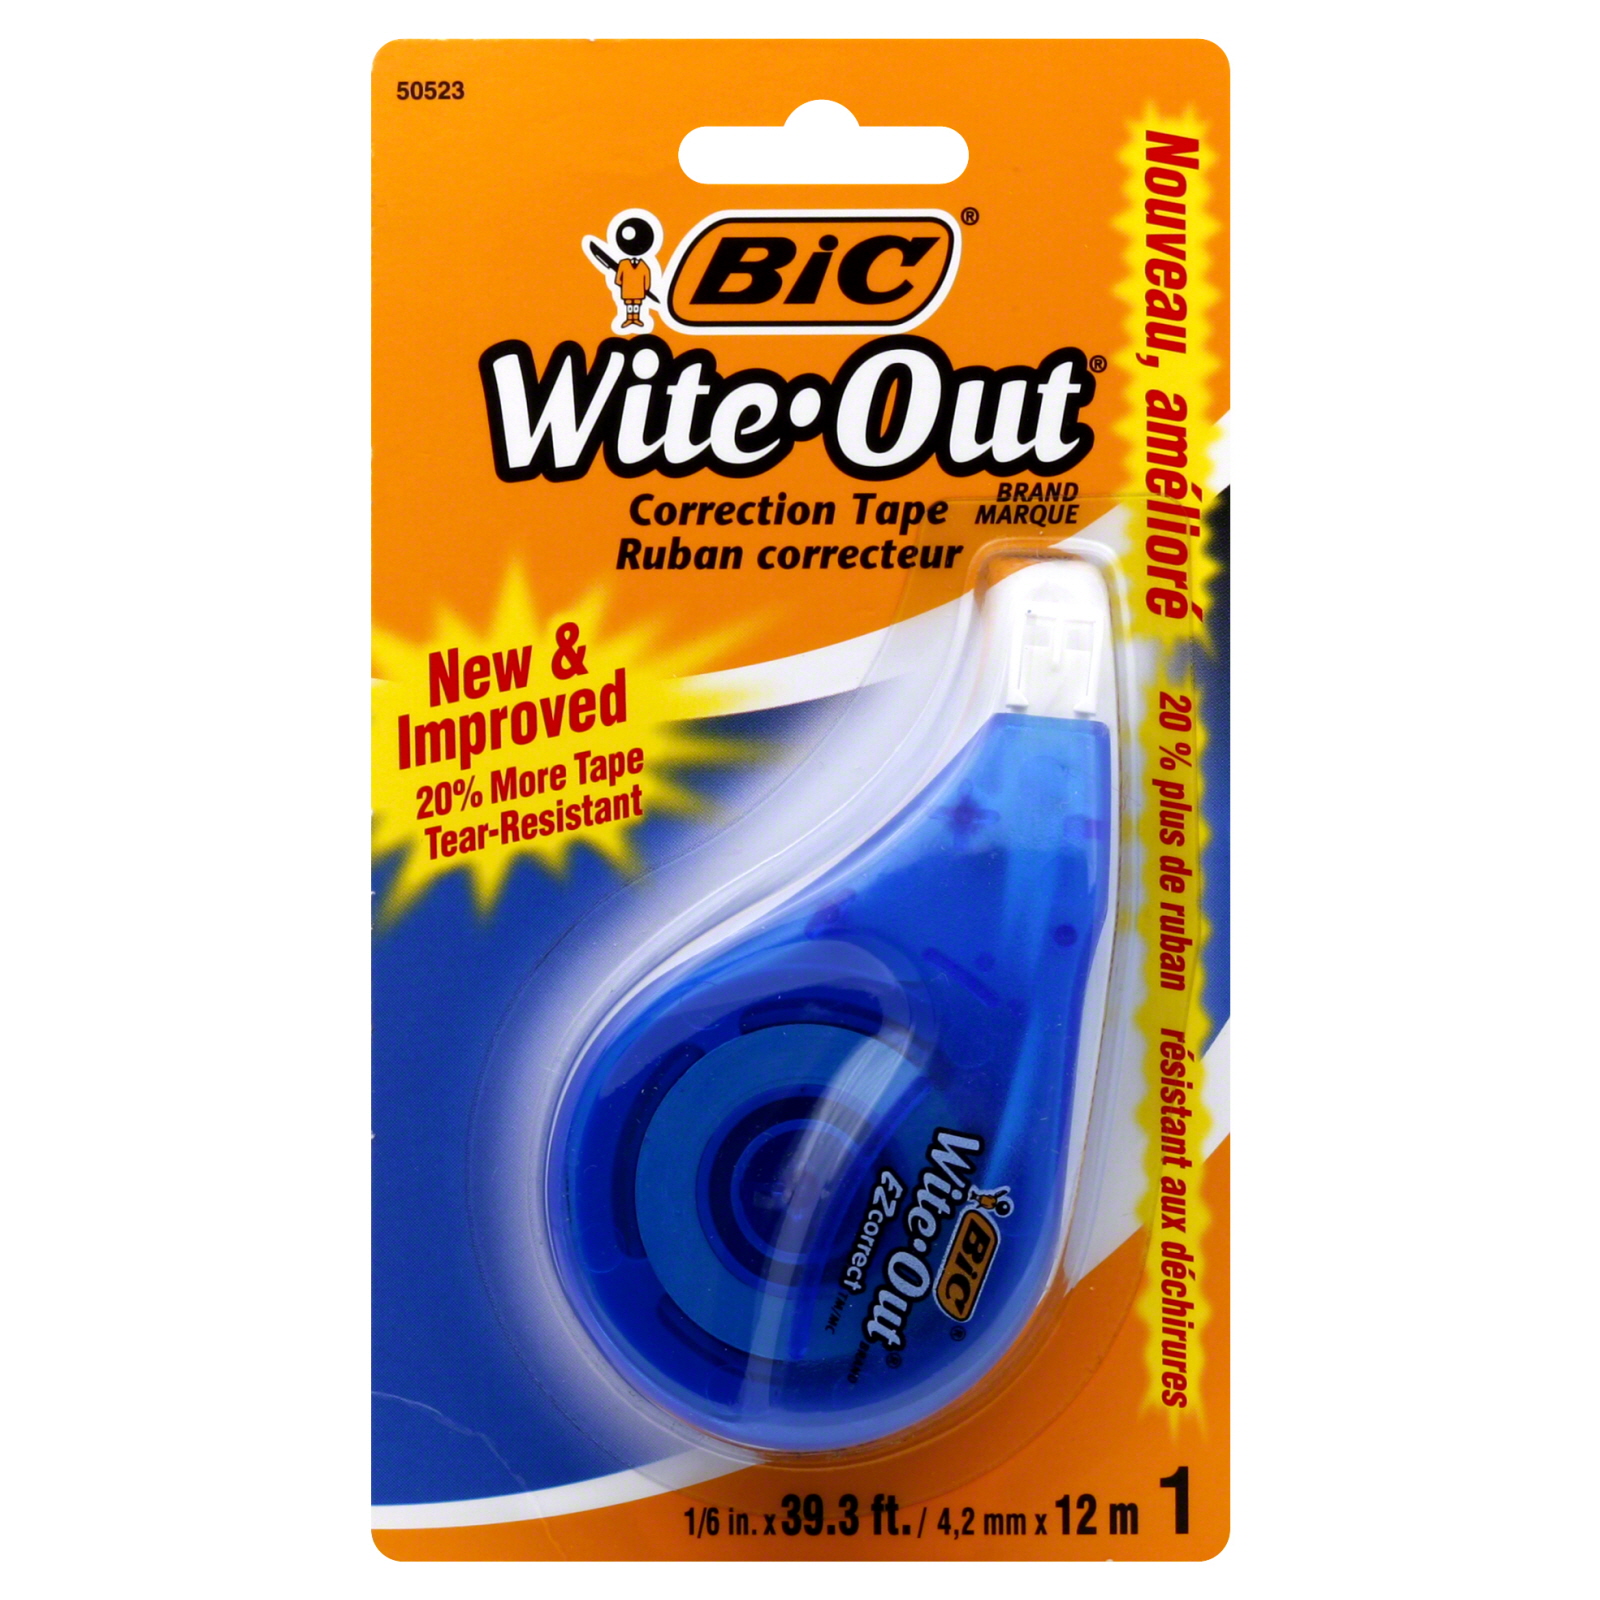 Wite-Out Correction Tape 1 each